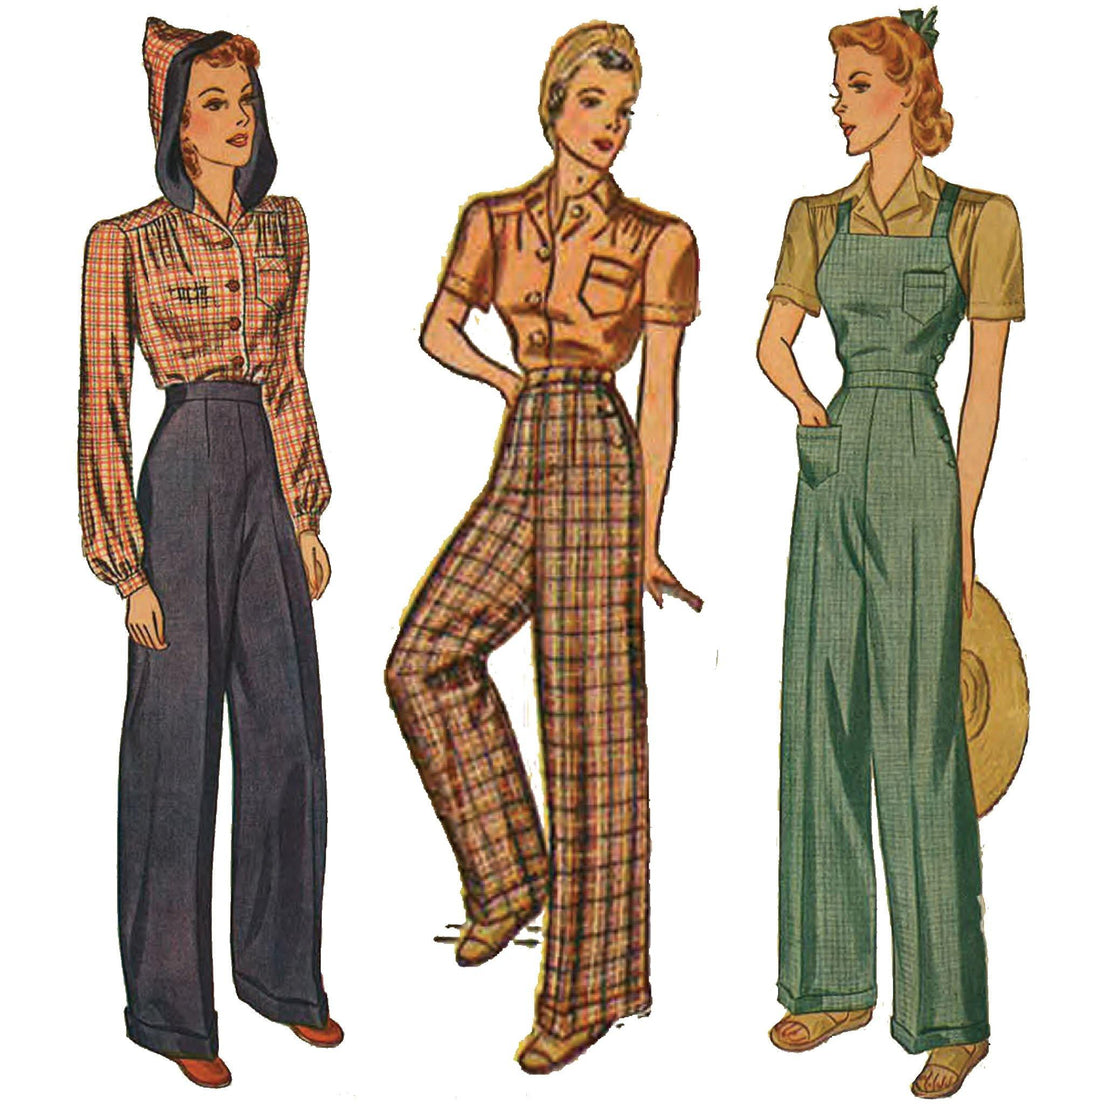 Women's Land Army Overalls, Dungarees, Vintage 1940s Sewing Pattern ...